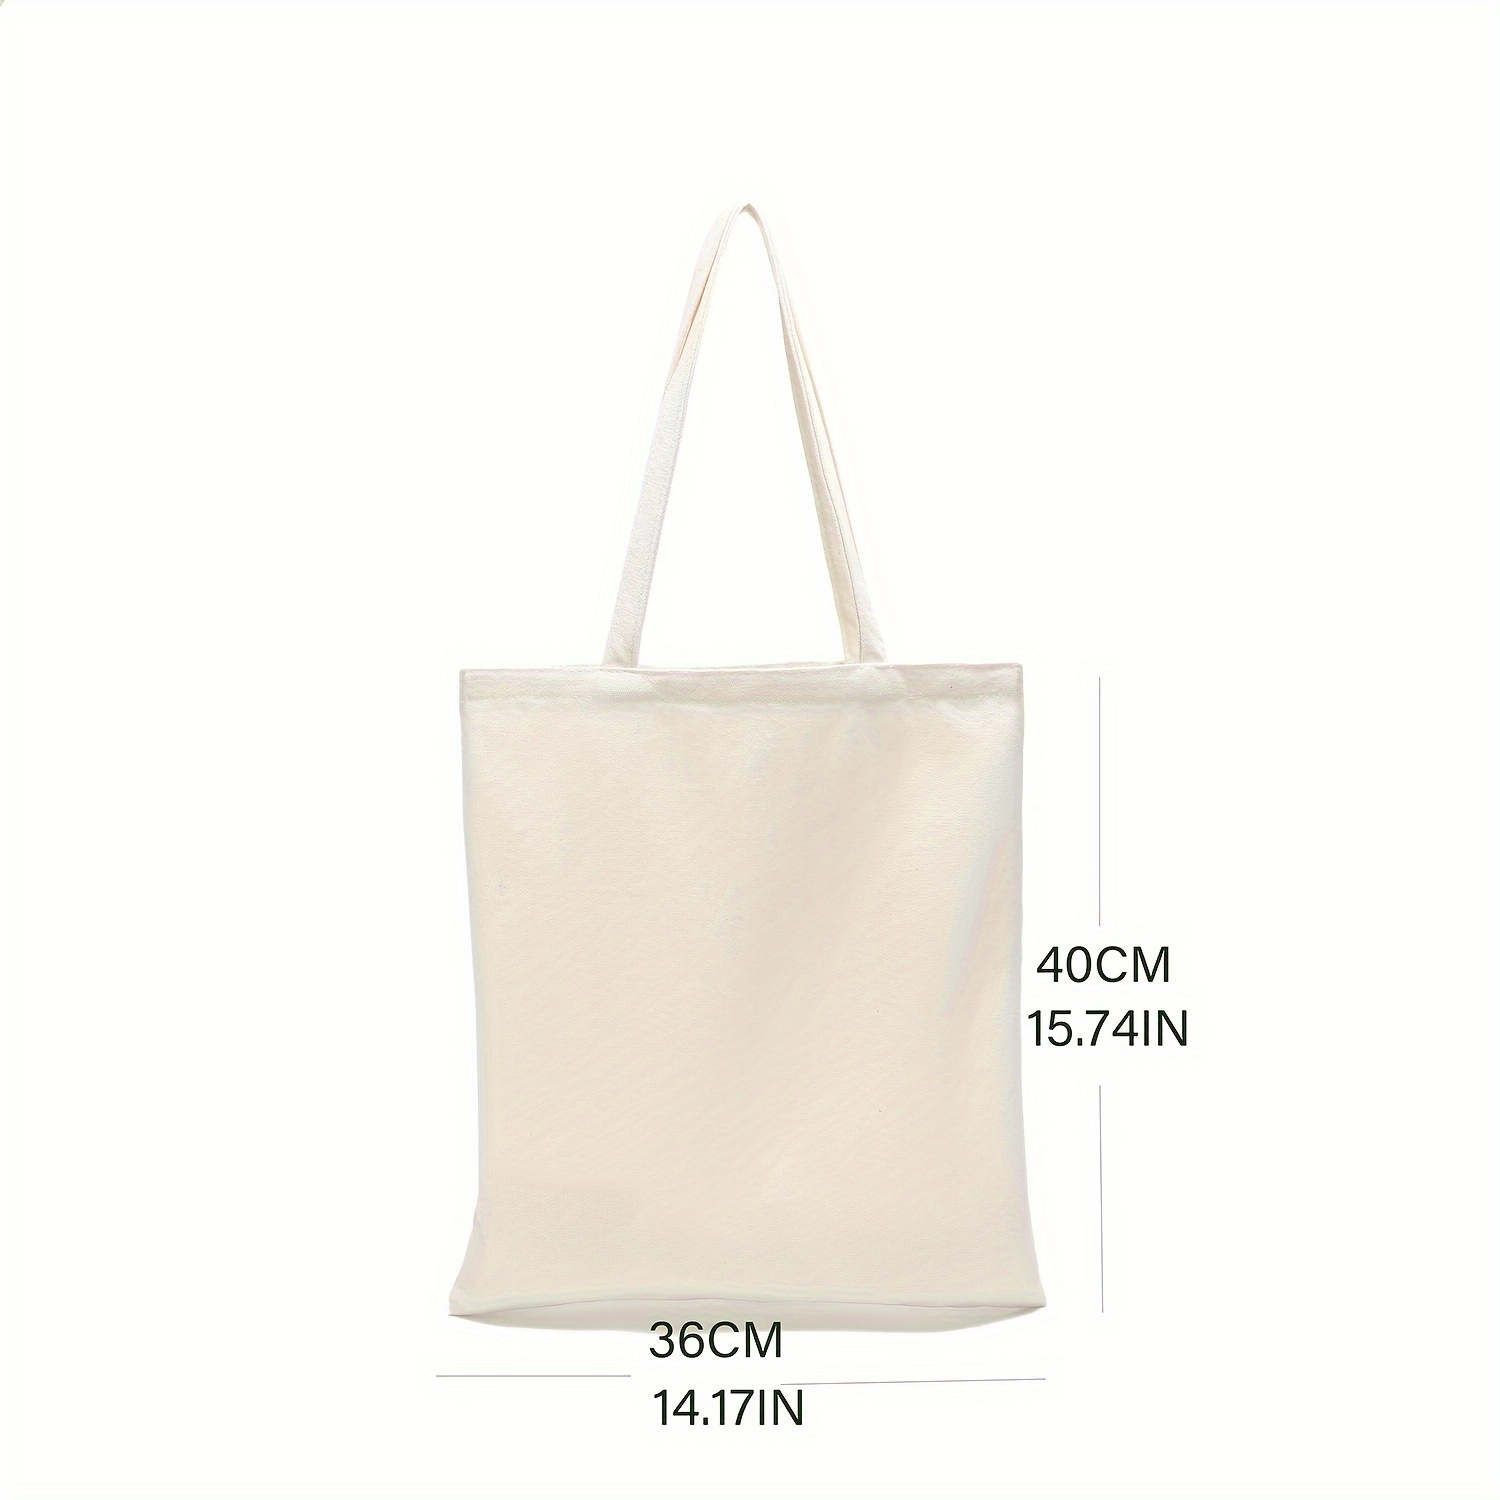 

Solid Color Canvas Handbag, Simple Office Worker Student Party Tote Bag, Portable Large Capacity Shopping Bag, Cute Versatile Casual Women's Bag, Large Canvas Commuter Bag, Travel Luggage Bag